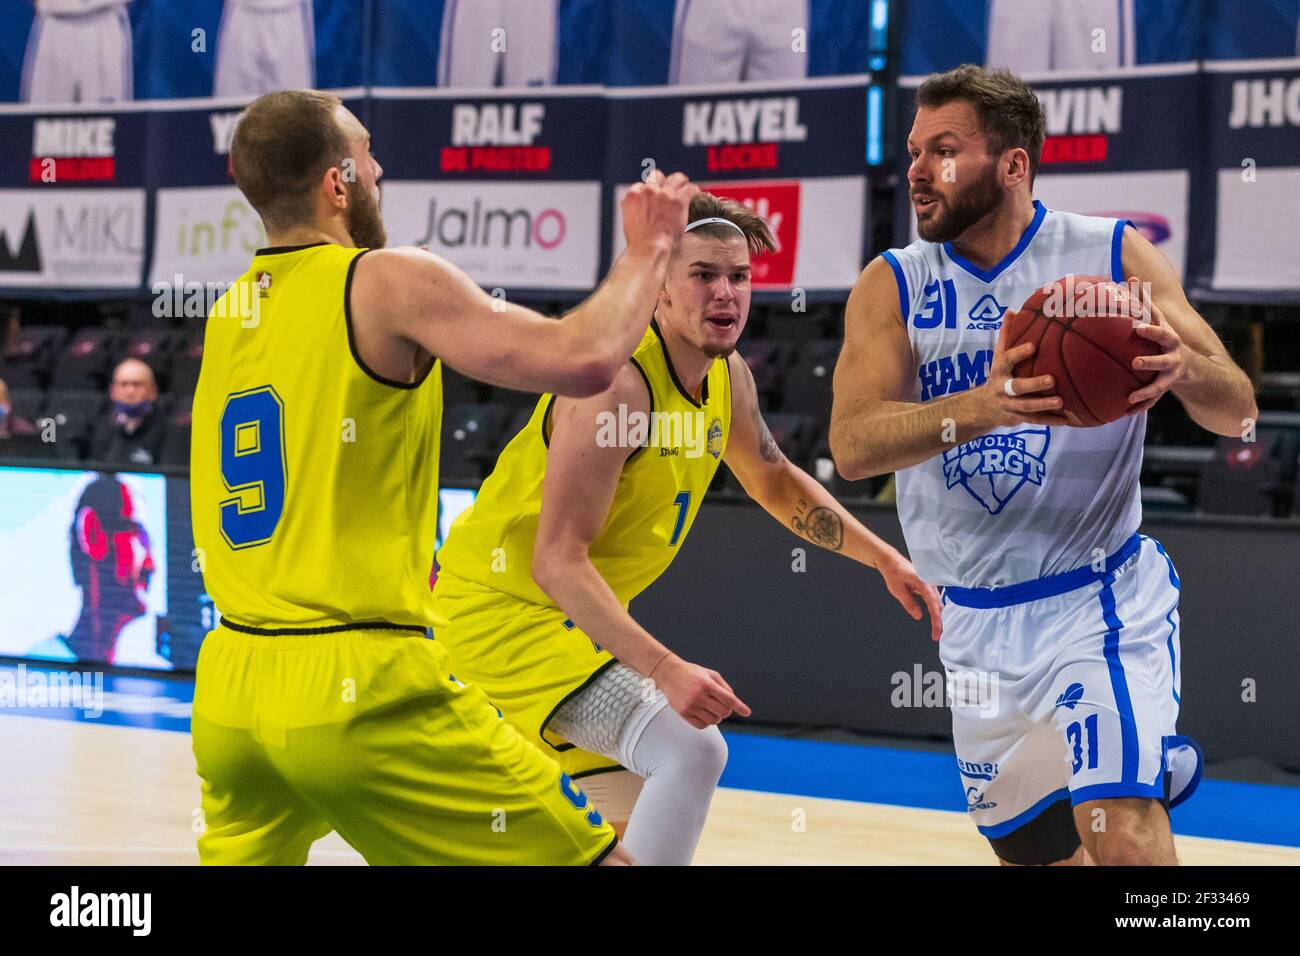 ZWOLLE, NETHERLANDS - MARCH 14: Ben Kovac of Den Helder Suns and Jozo Rados  of Landstede Hammers Zwolle during the Dutch Basketball League match betwe  Stock Photo - Alamy